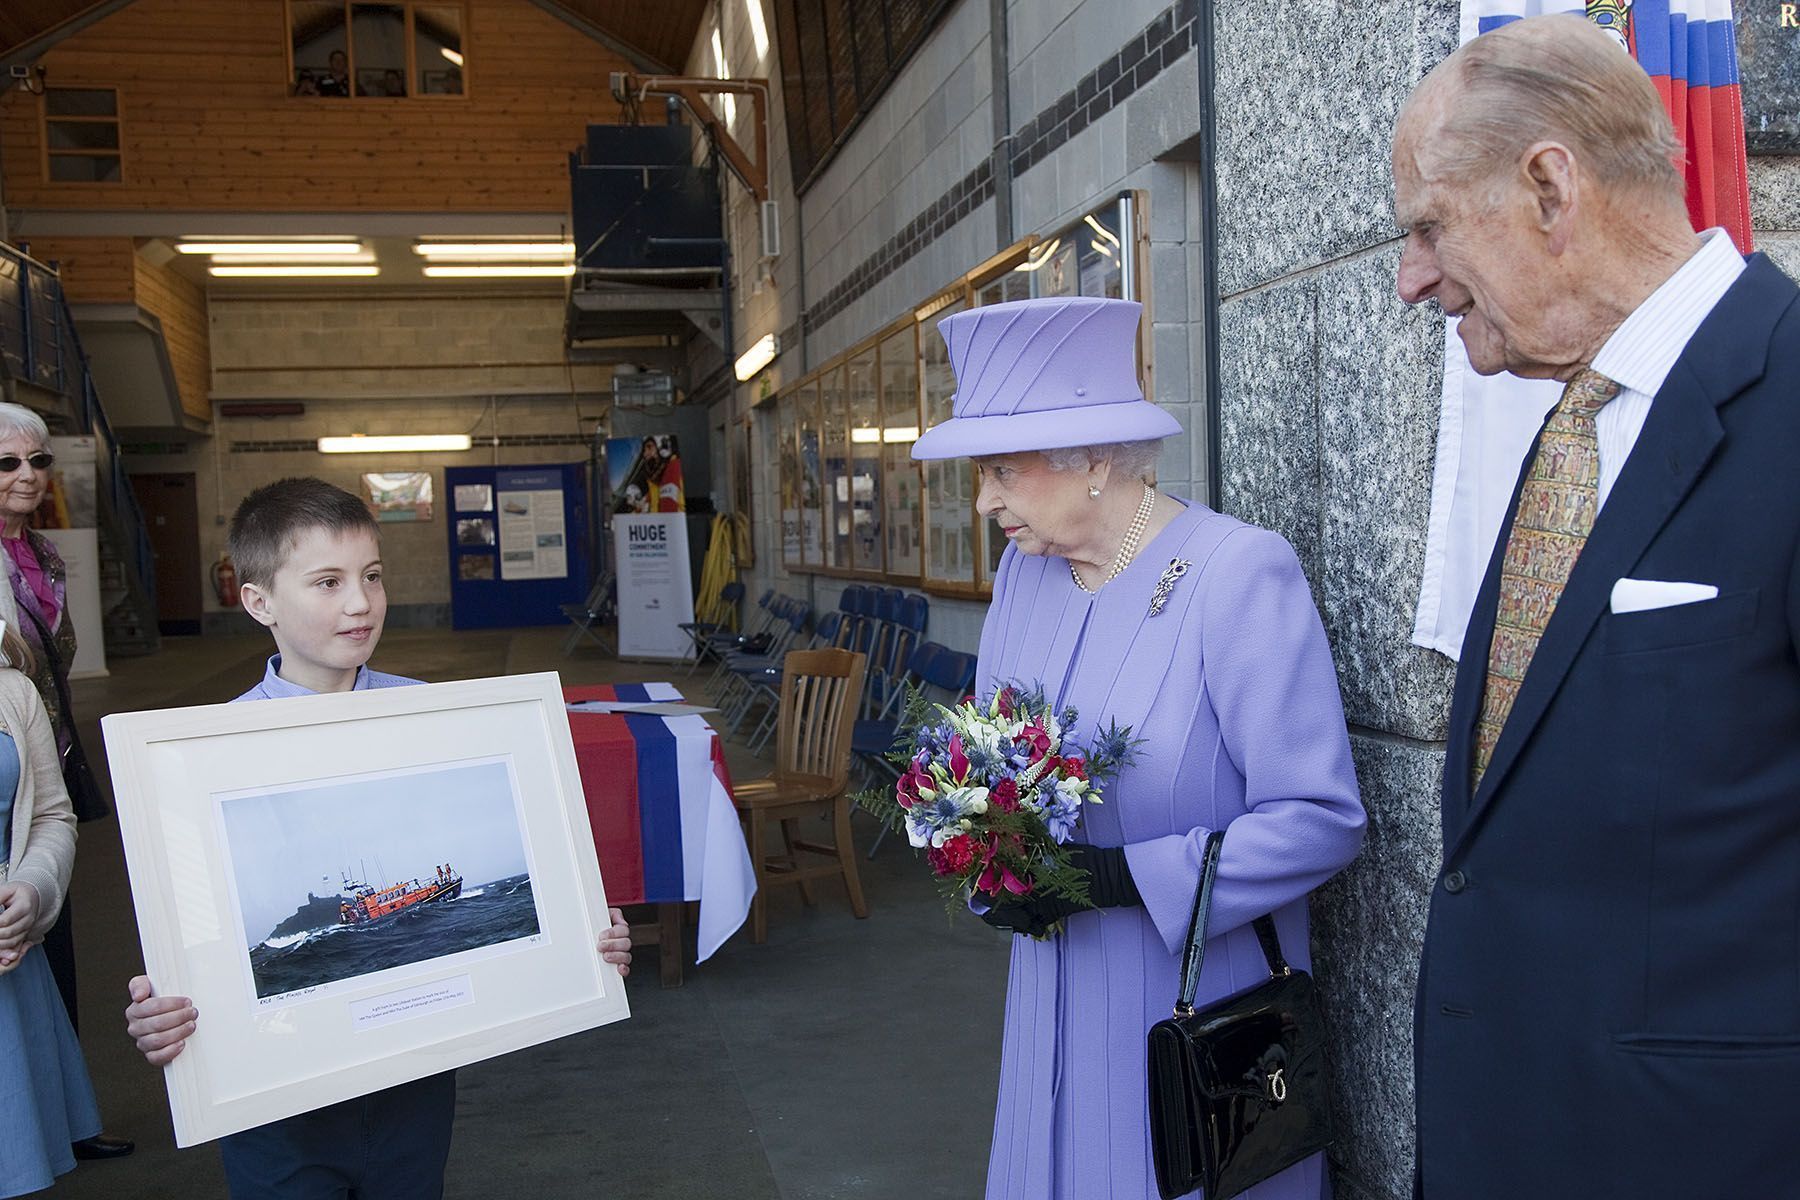 Lifeboatman Scott Perkins son William Perkin presents a picture to the Queen and Prince Philip.